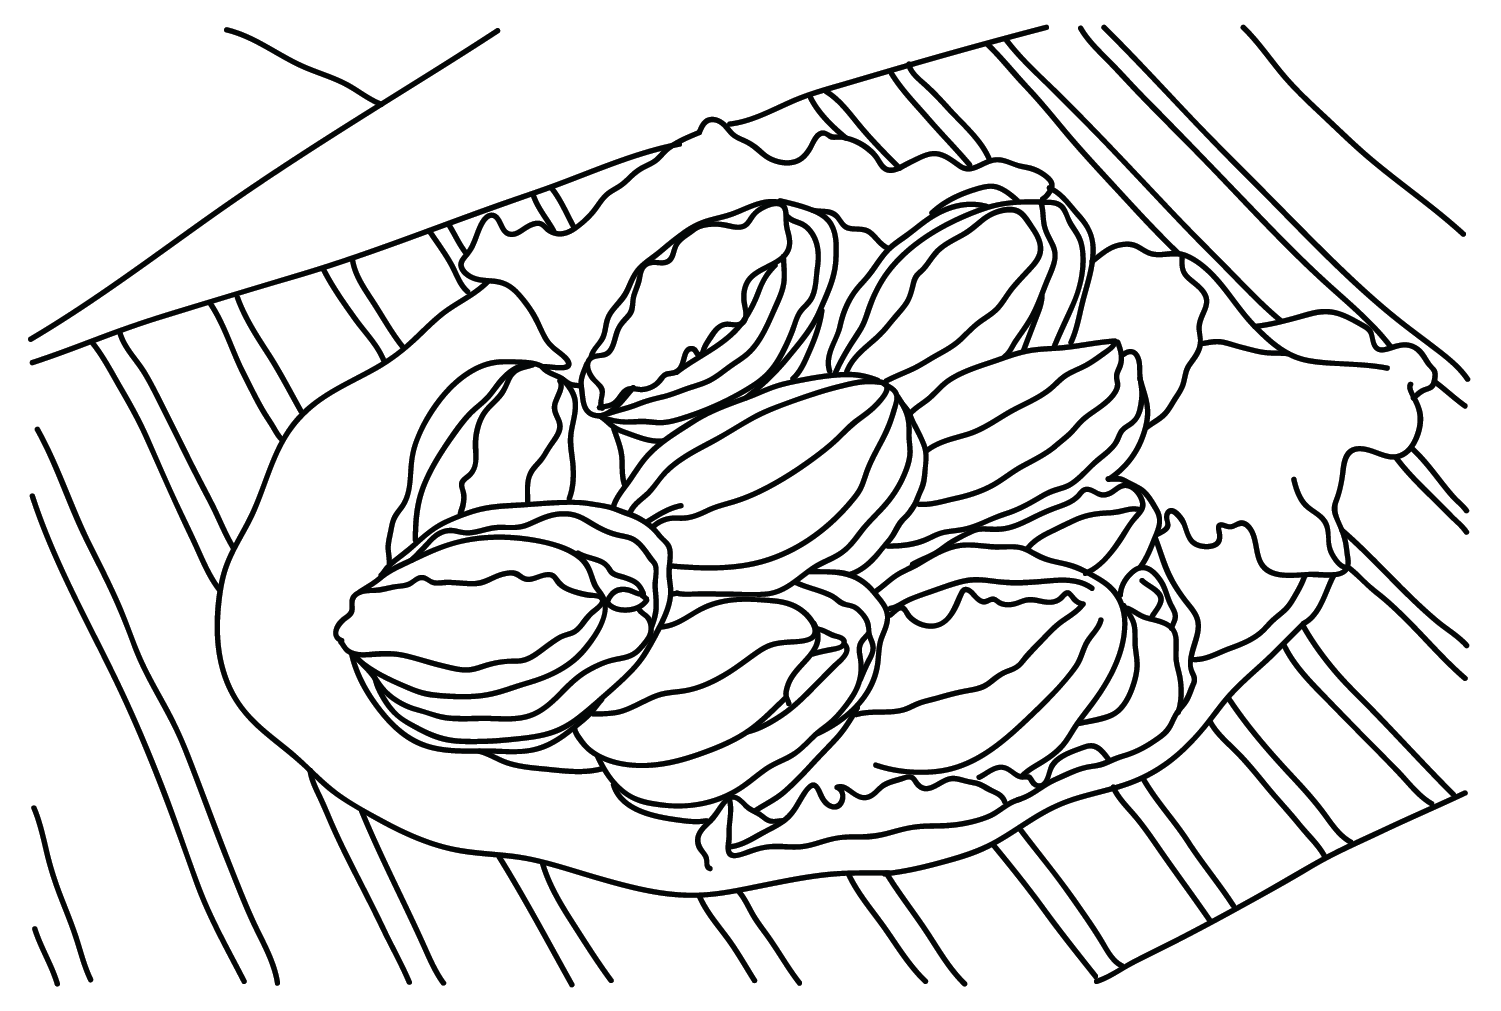 Drawing Abalone Coloring Page from Abalone